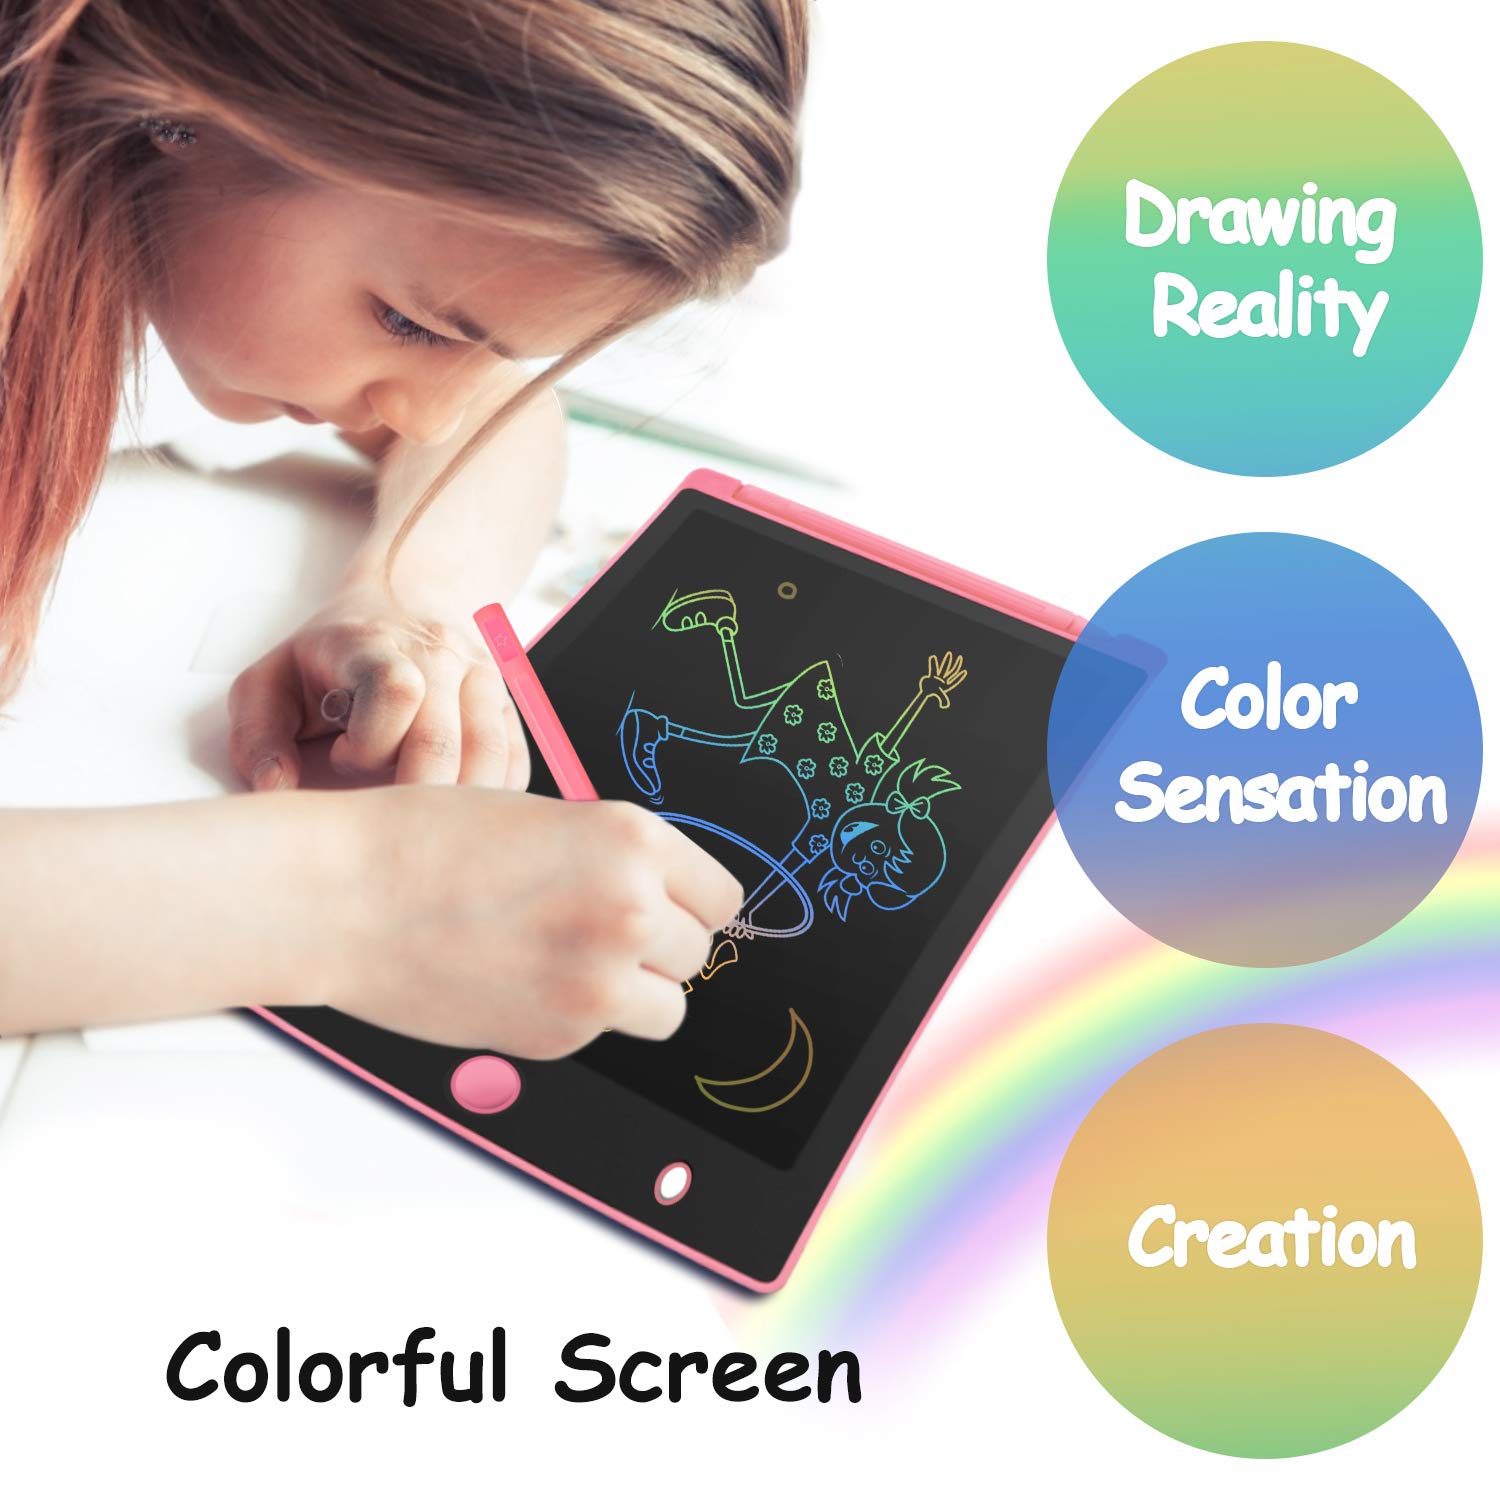 ORSEN 2 Pack LCD Writing Tablet for Kids, Colorful Doodle Board Drawing Pad for Kids, Learning Educational Toy Gift for Age 2 3 4 5 6 7 8 Year Old Girls Boys Toddlers